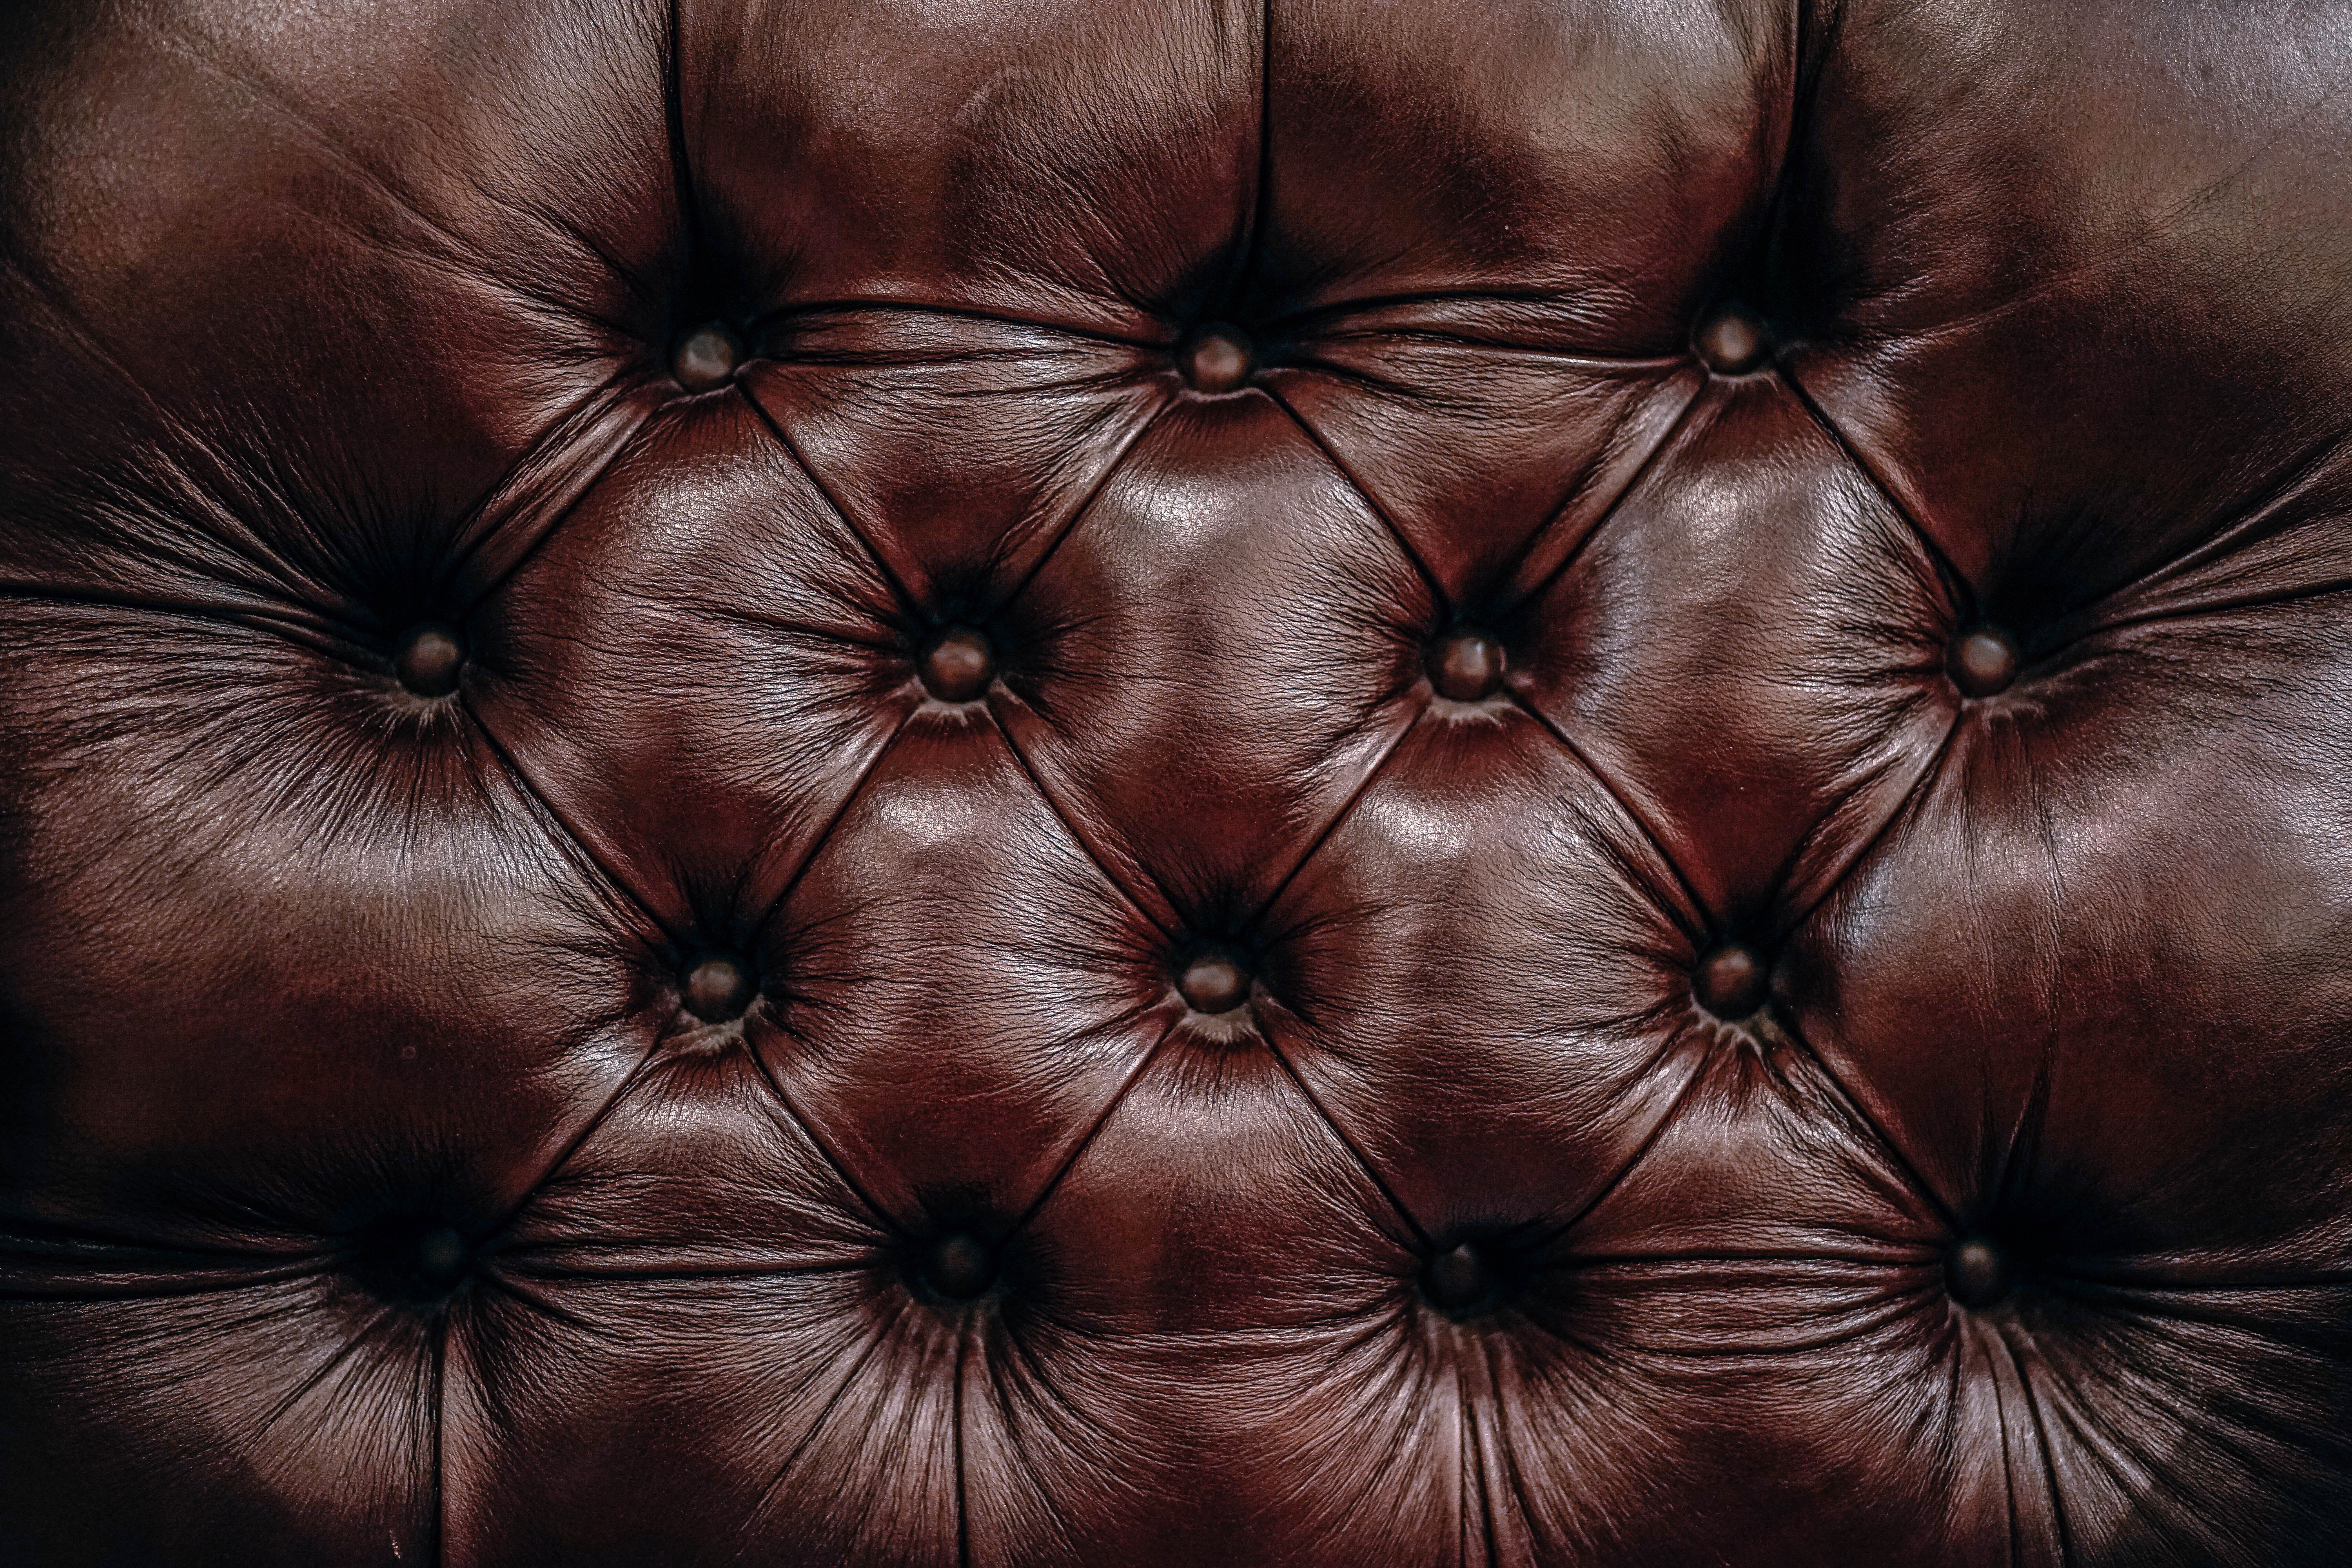 surface, skin, textures, texture, leather